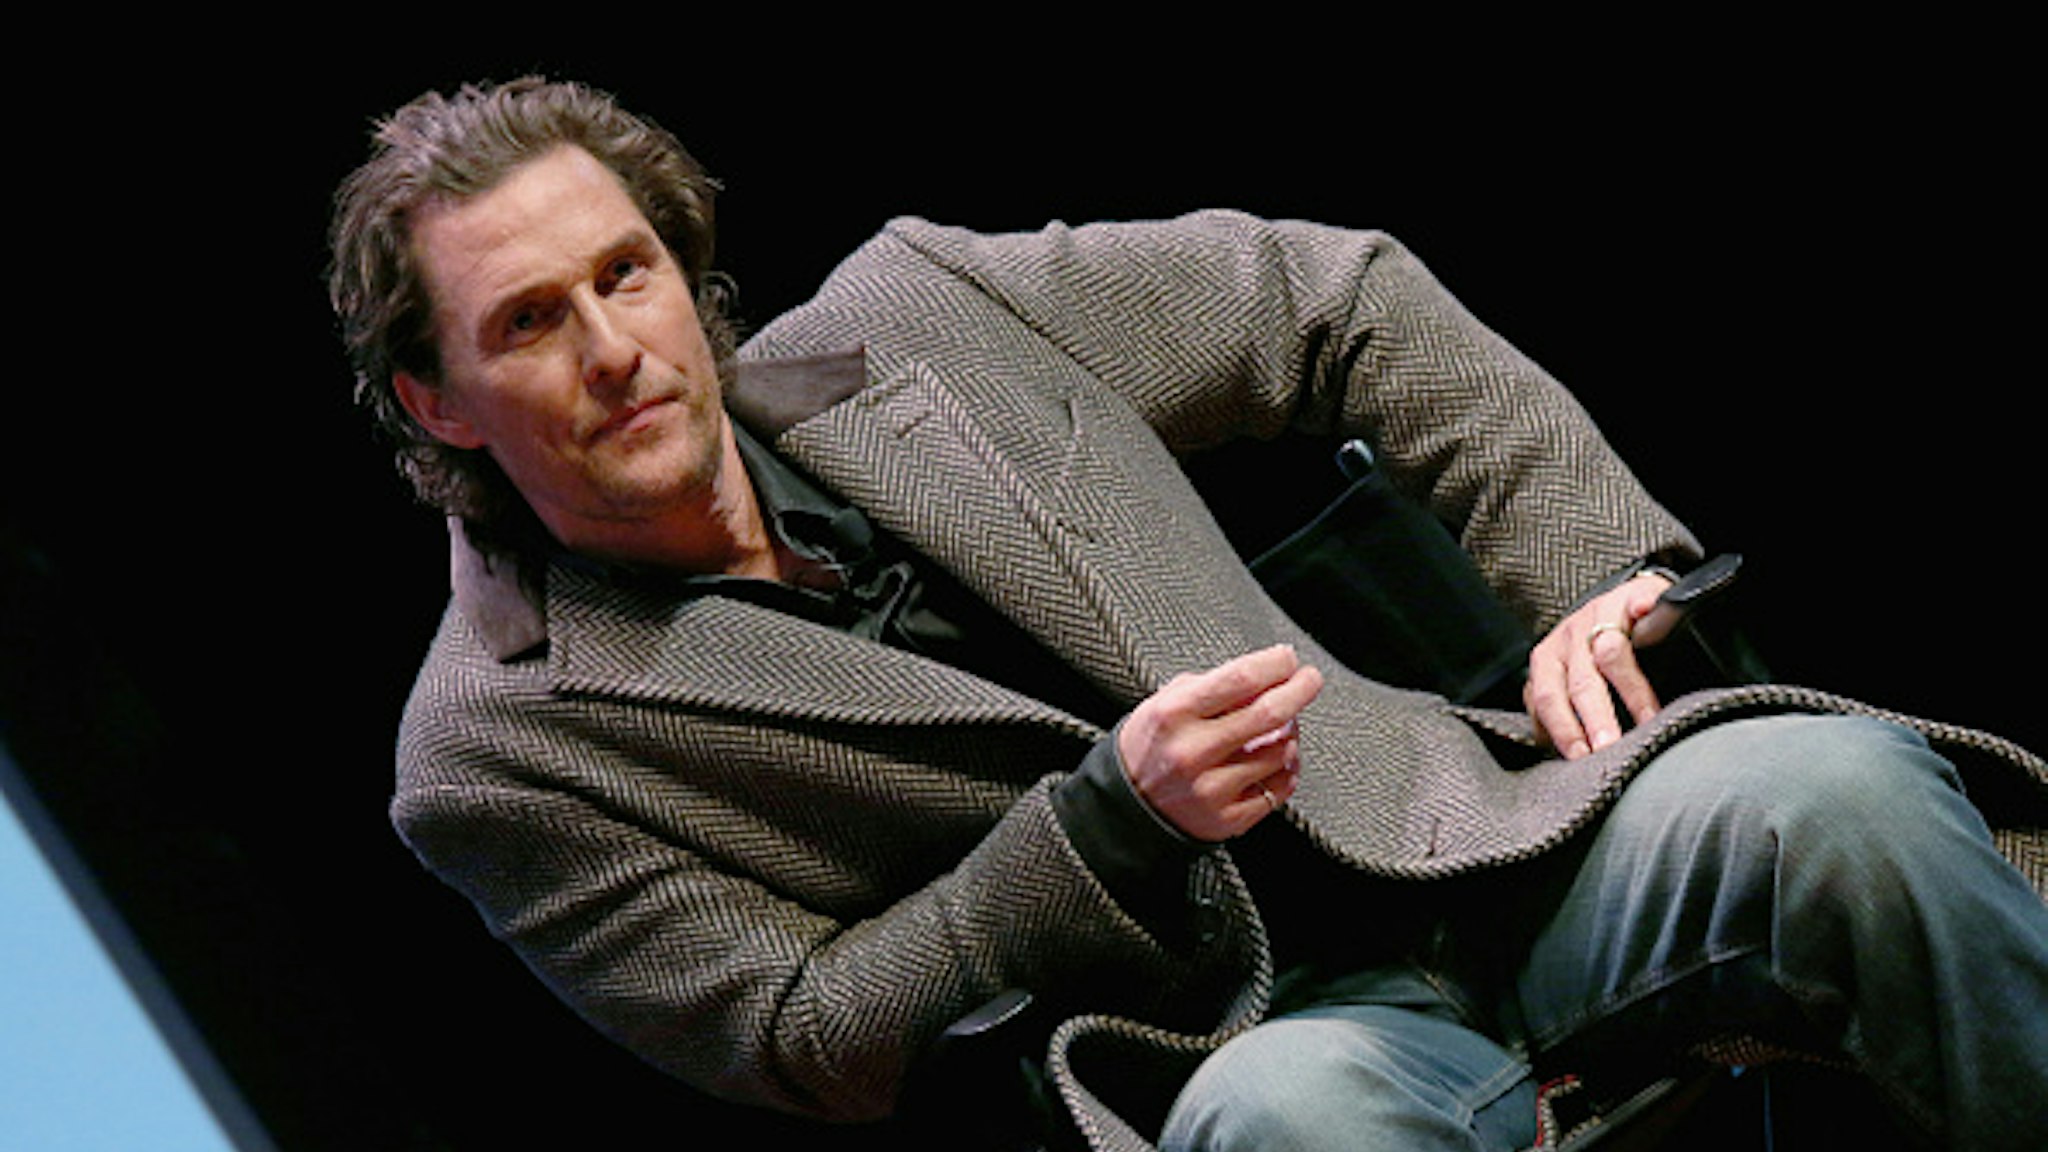 AUSTIN, TEXAS - JANUARY 21: Matthew McConaughey participates in a Q&amp;A after a special screening of his new film "The Gentlemen" at Hogg Memorial Auditorium at The University of Texas at Austin on January 21, 2020 in Austin, Texas.